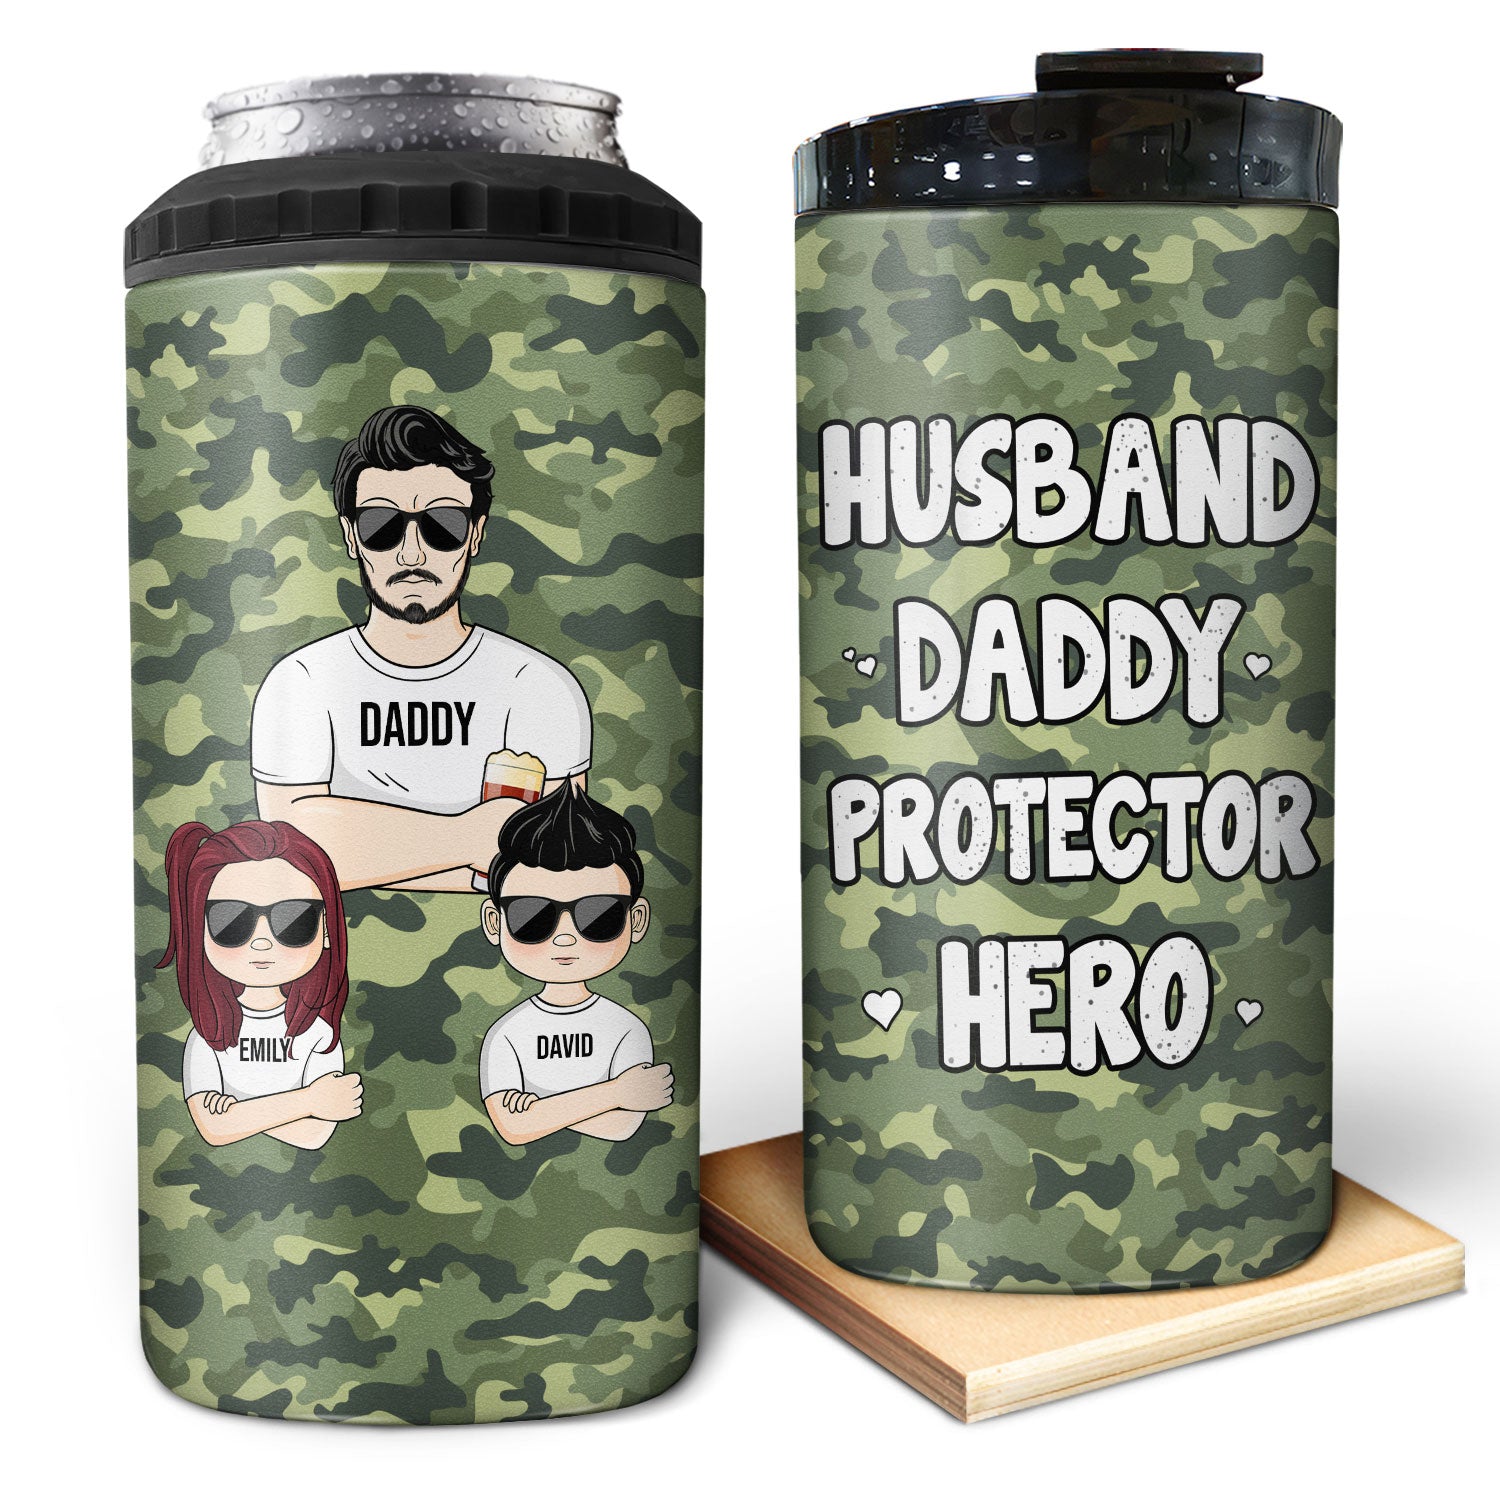 Husband Daddy Protector Hero - Birthday, Loving Gift For Dad, Father, Grandfather, Grandpa, Daughters, Sons - Personalized Custom 4 In 1 Can Cooler Tumbler